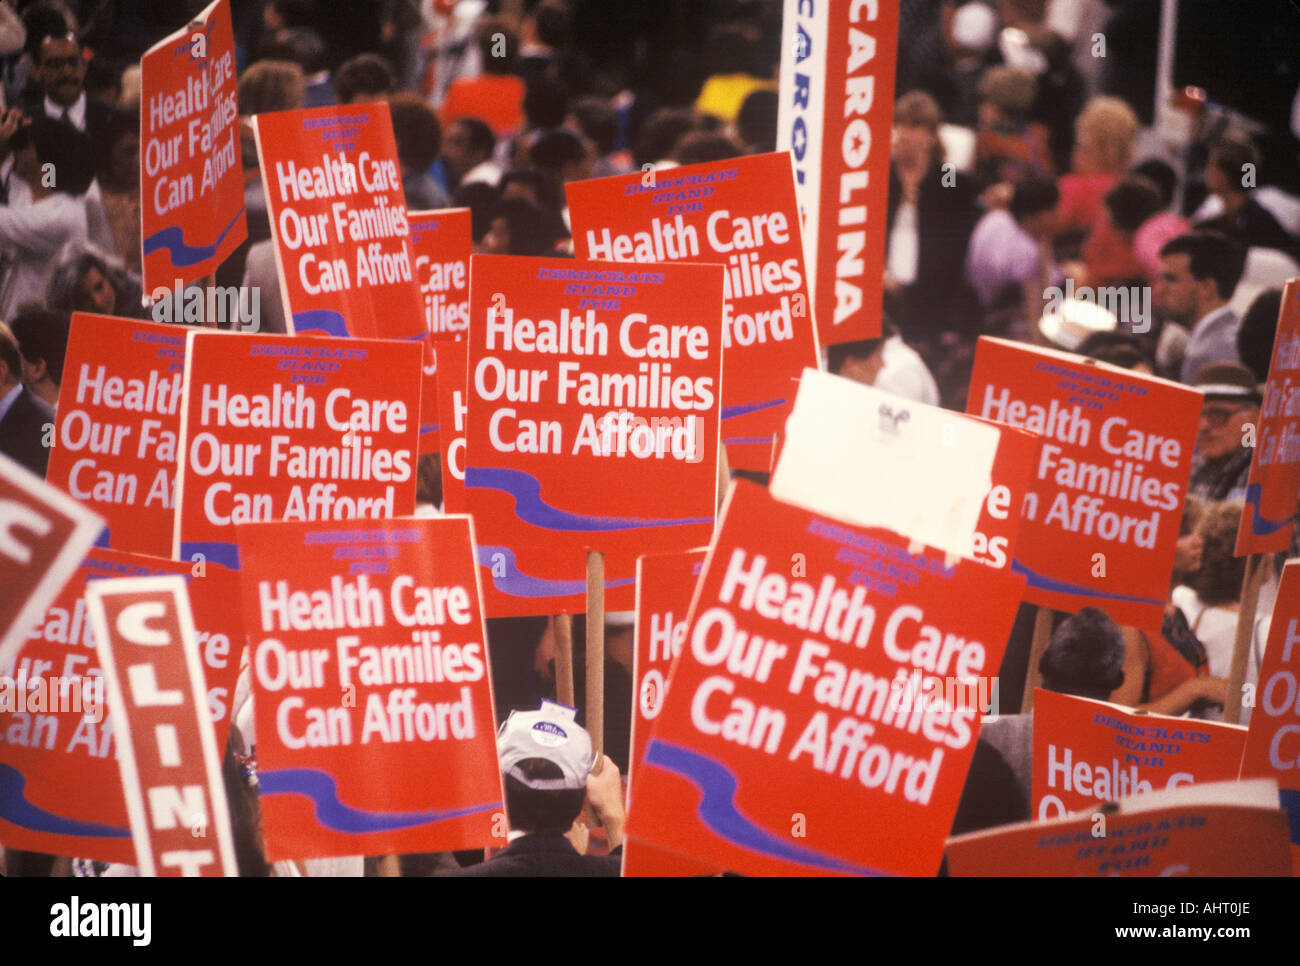 Delegates for family healthcare at the Presidential celebration of the 1992 Democratic Convention in Madison Square Garden Stock Photo